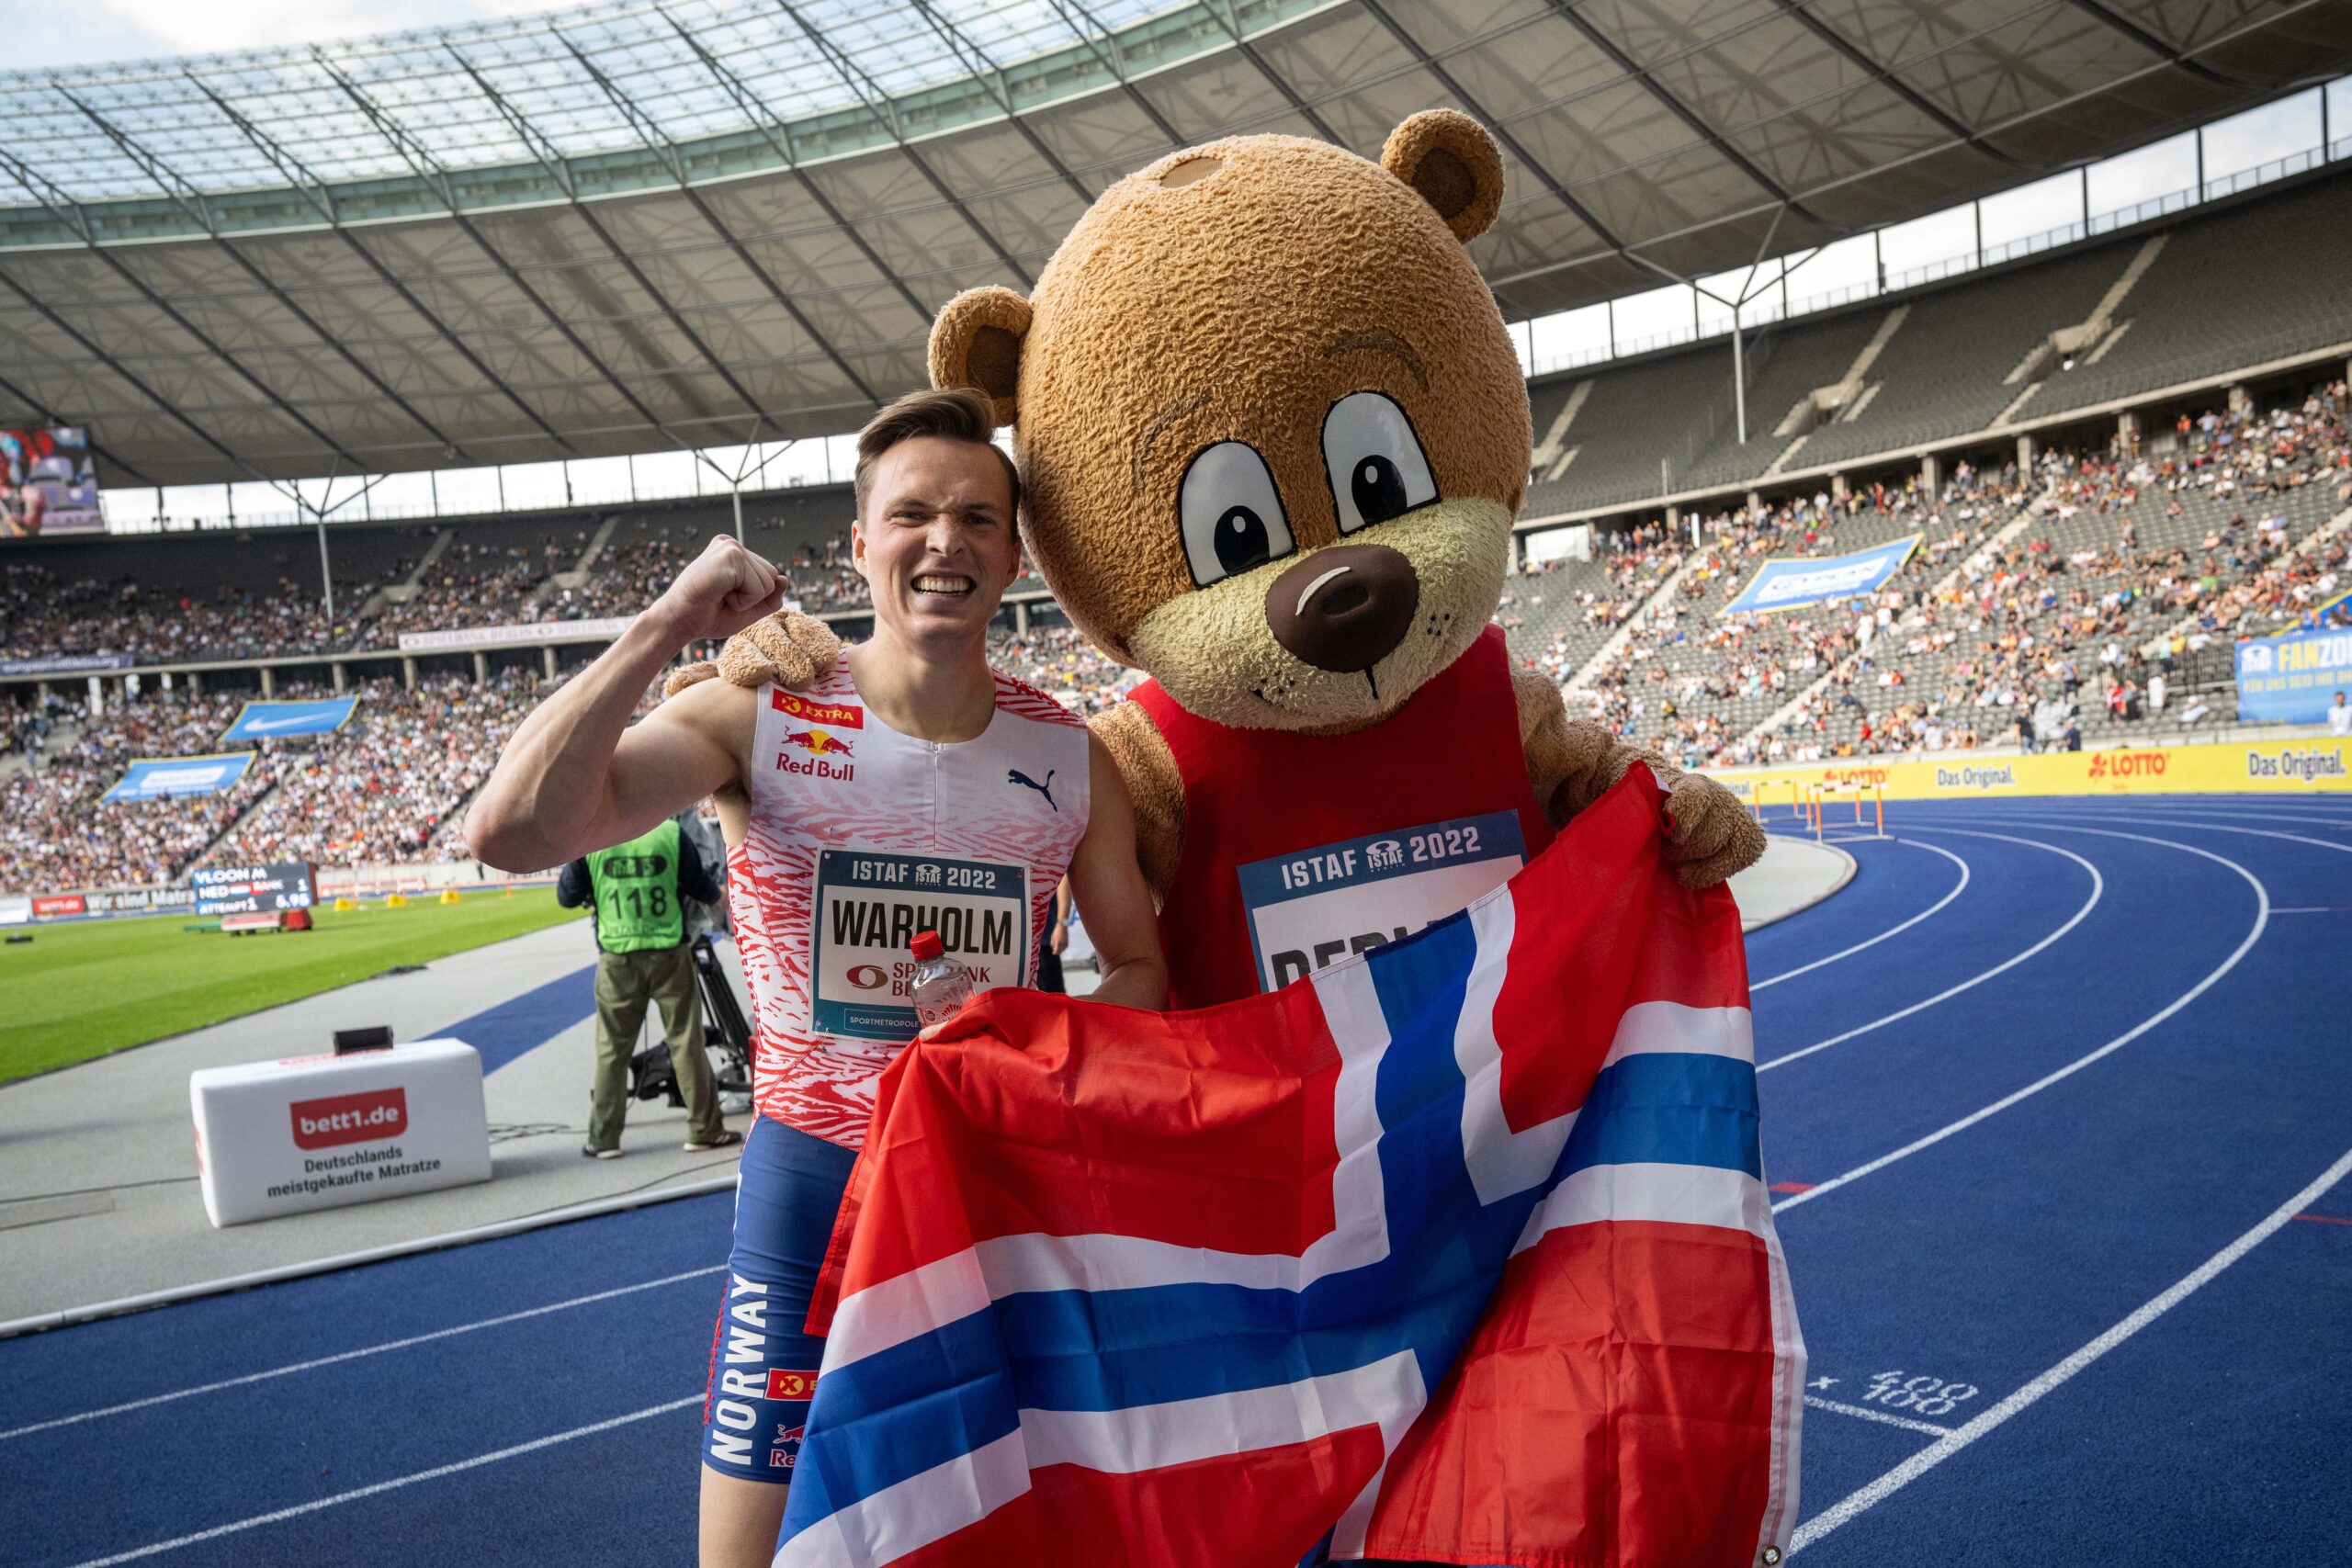 HIGH QUALITY PERFORMANCES AT BERLIN’S ISTAF MEETING